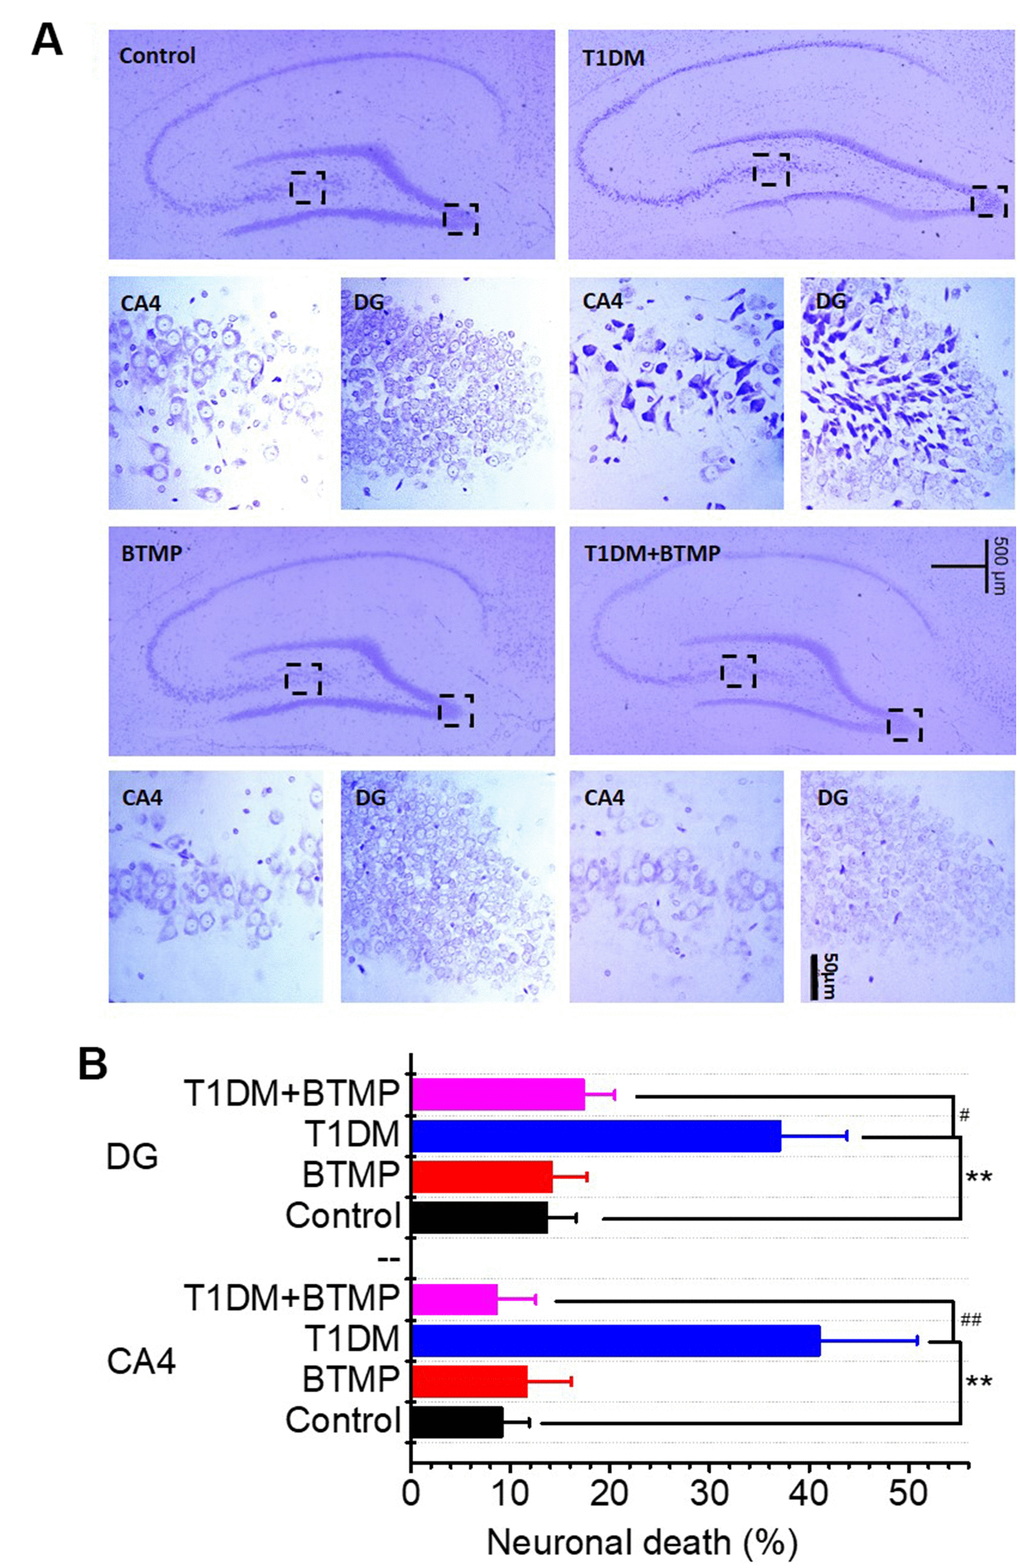 Nissl staining of hippocampal neurons of rats treated with BTMP. Animal groups and treatment were as described in Figure 2 except that hippocampal slices were prepared and stained with cresyl violet (panel A). Numbers of necrotic neurons were counted under a microscope as described in the Materials and Methods (panel B). The number of those groups are control (n=10), BTMP (n=9), T1DM (n=10) and T1DM+BTMP (n=10). All values are expressed as the mean ± S.E.M. “*” compared to the control group. “#” represents the difference between the T1DM and T1DM+BTMP groups. All values are expressed as the mean ± S.E.M. **, P P P 